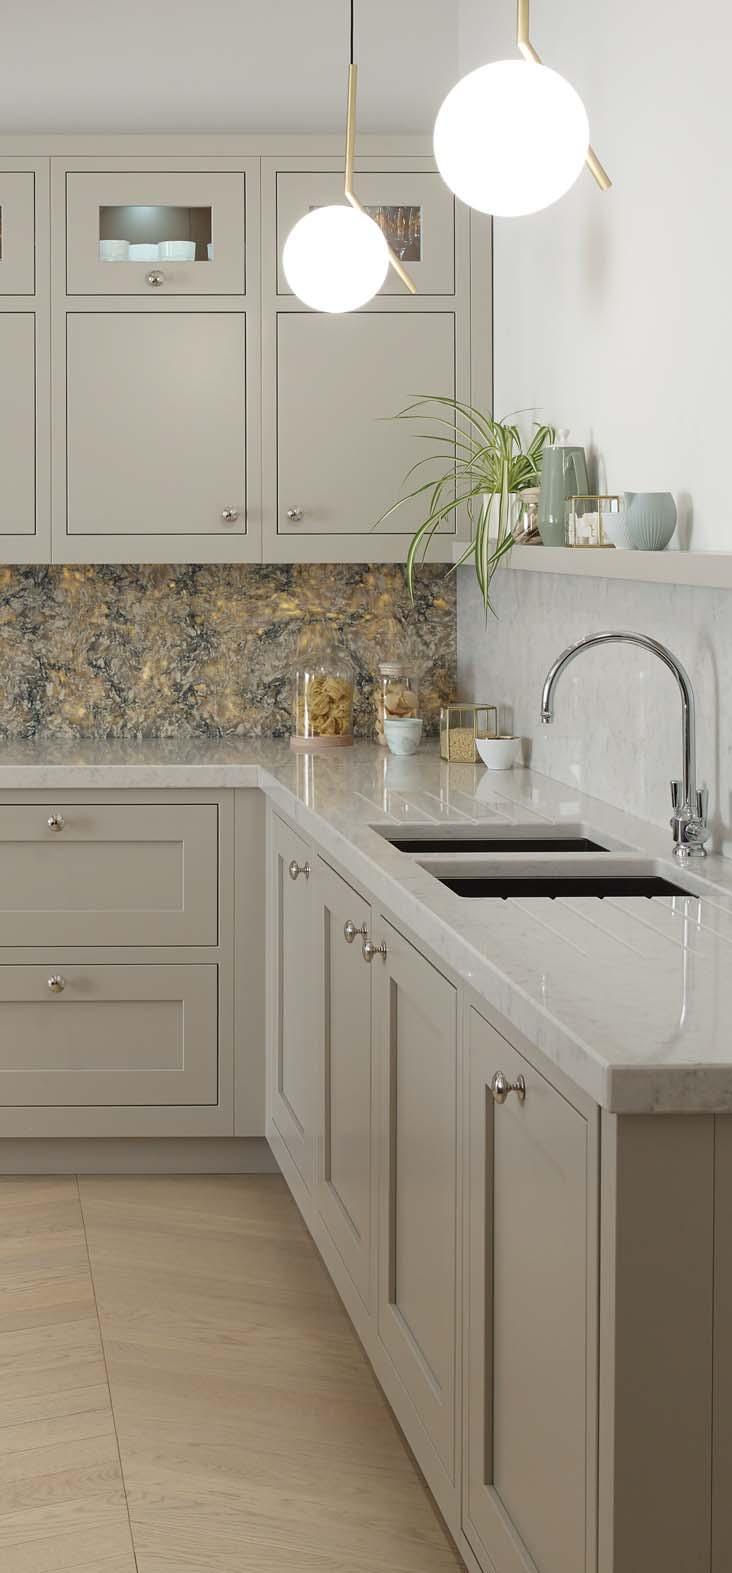 Worksurfaces play a strong role in the identity of this scheme, with the mix of the marble effect evident in the Lagoon quartz, which counterpoints